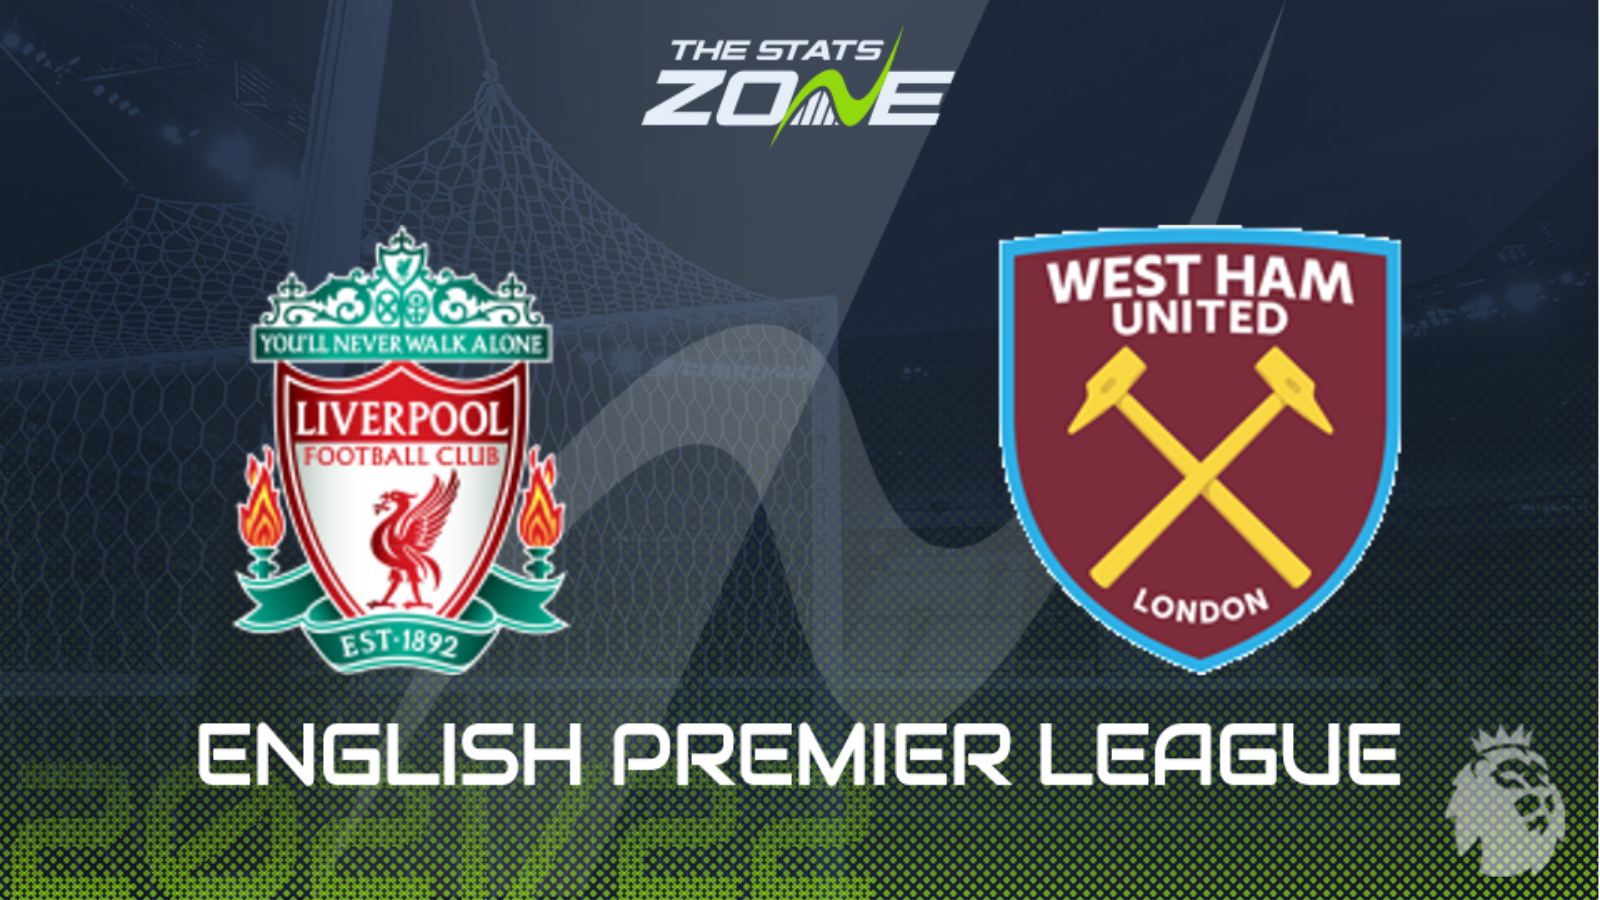 fordel depositum Bloodstained Liverpool vs West Ham Preview & Prediction - The Stats Zone